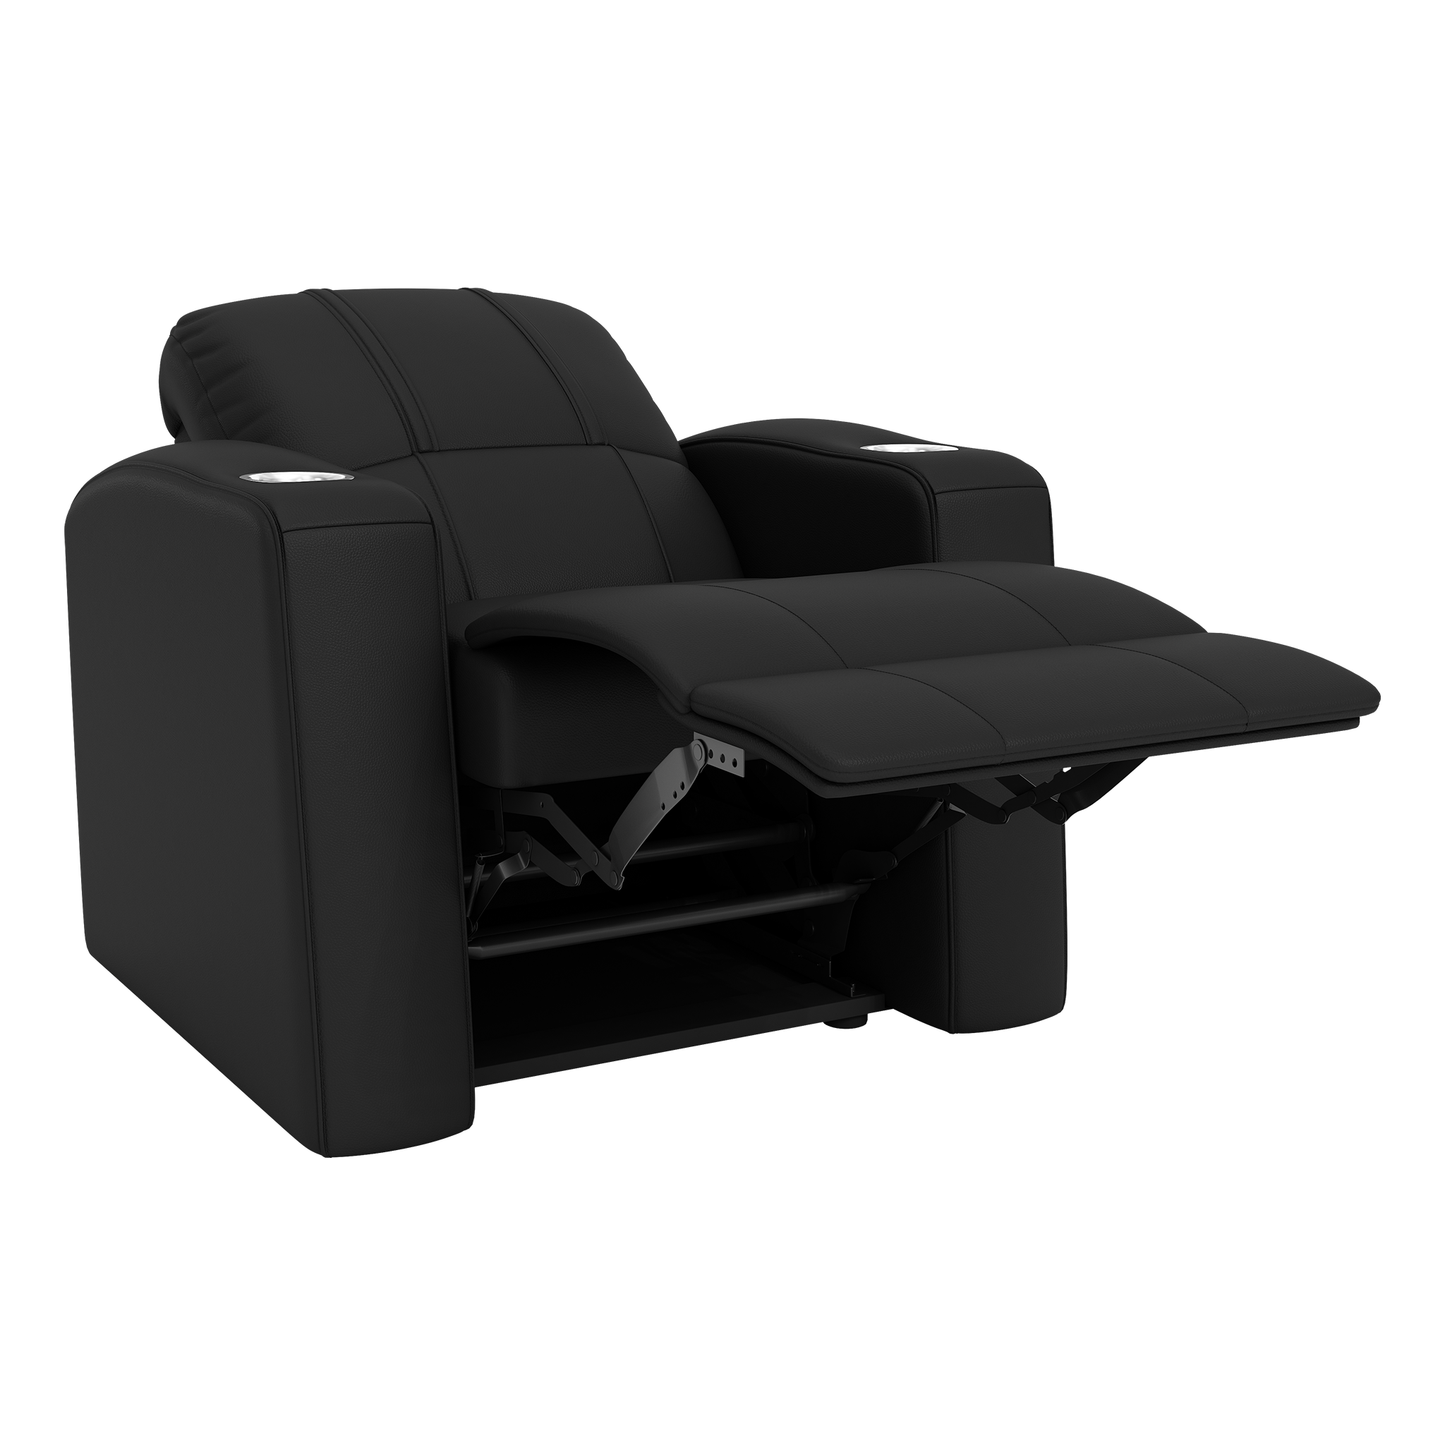 Relax Home Theater Recliner with San Jose Earthquakes Logo